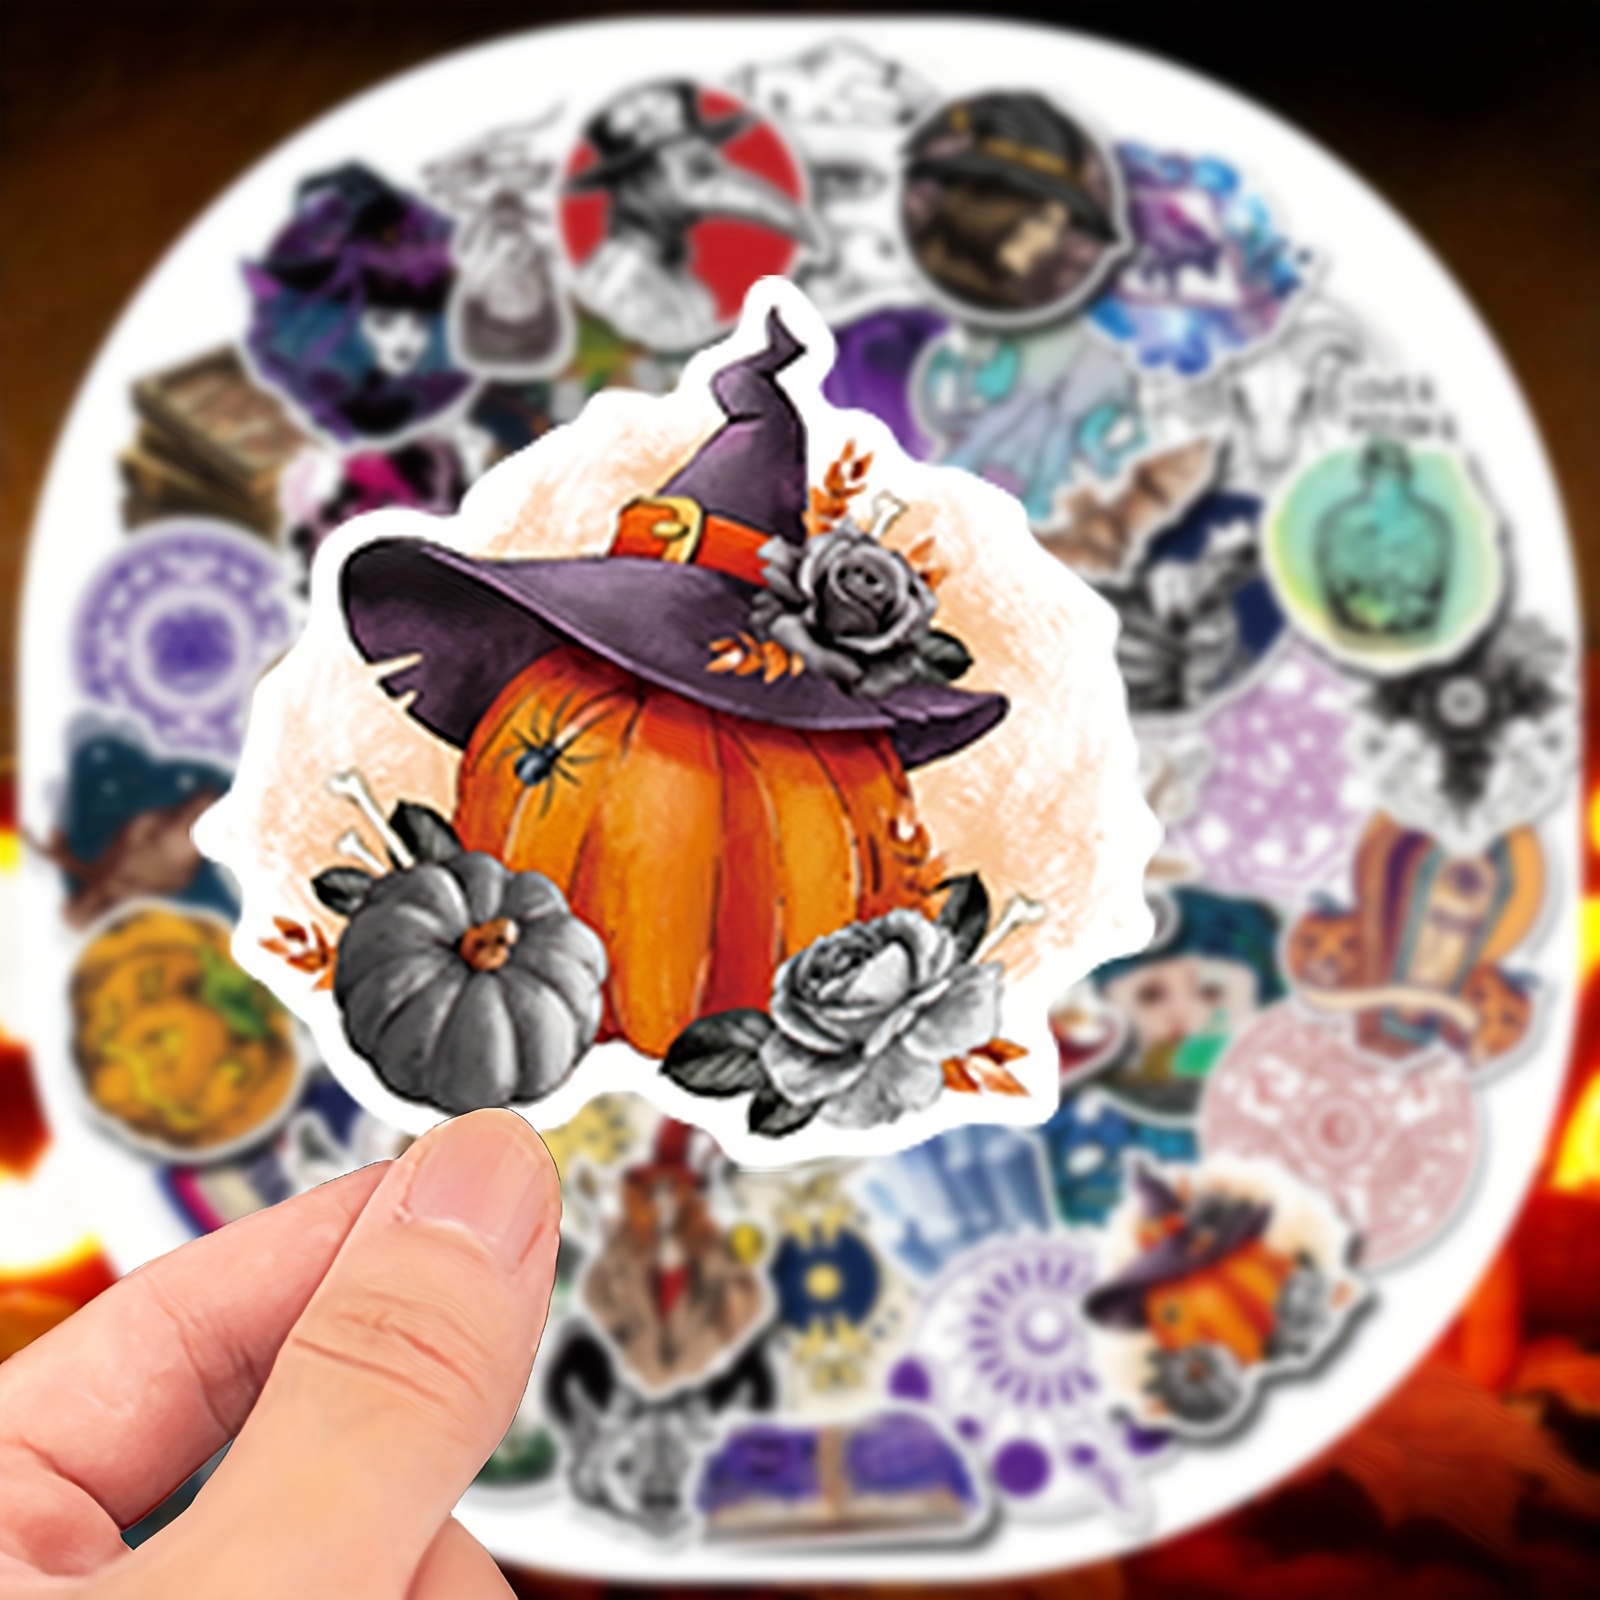 China Factory 100Pcs Halloween Stickers for Kids Teens Adults, Pumpkin  Stickers Decals for Laptop Skateboard, Funny Party Stickers 40~60mm in bulk  online 